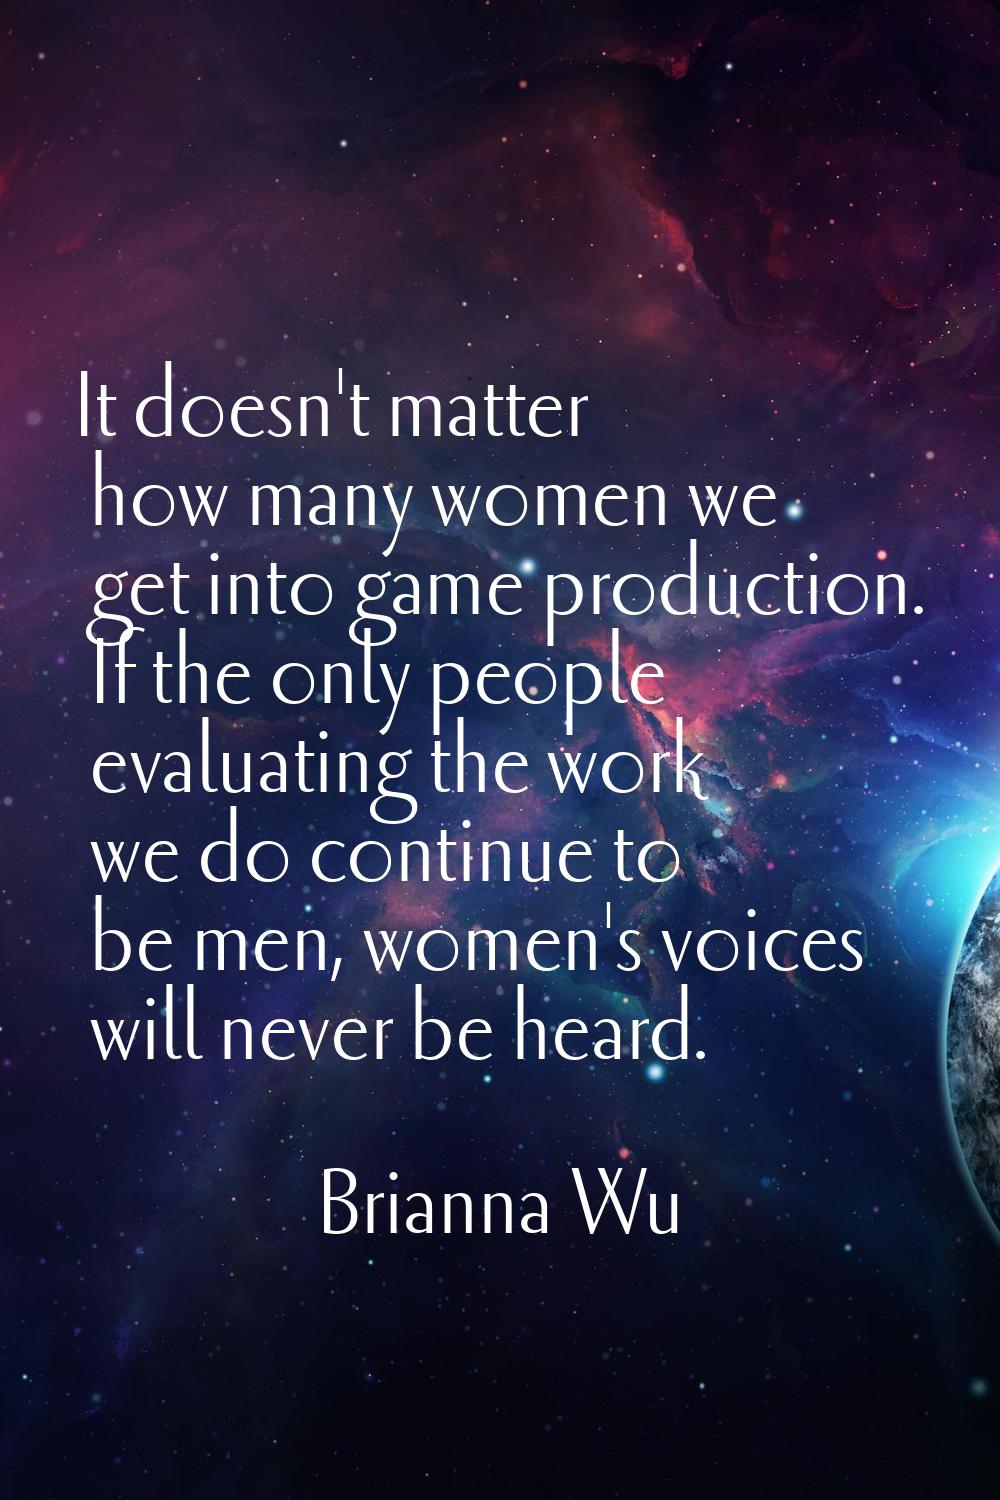 It doesn't matter how many women we get into game production. If the only people evaluating the wor